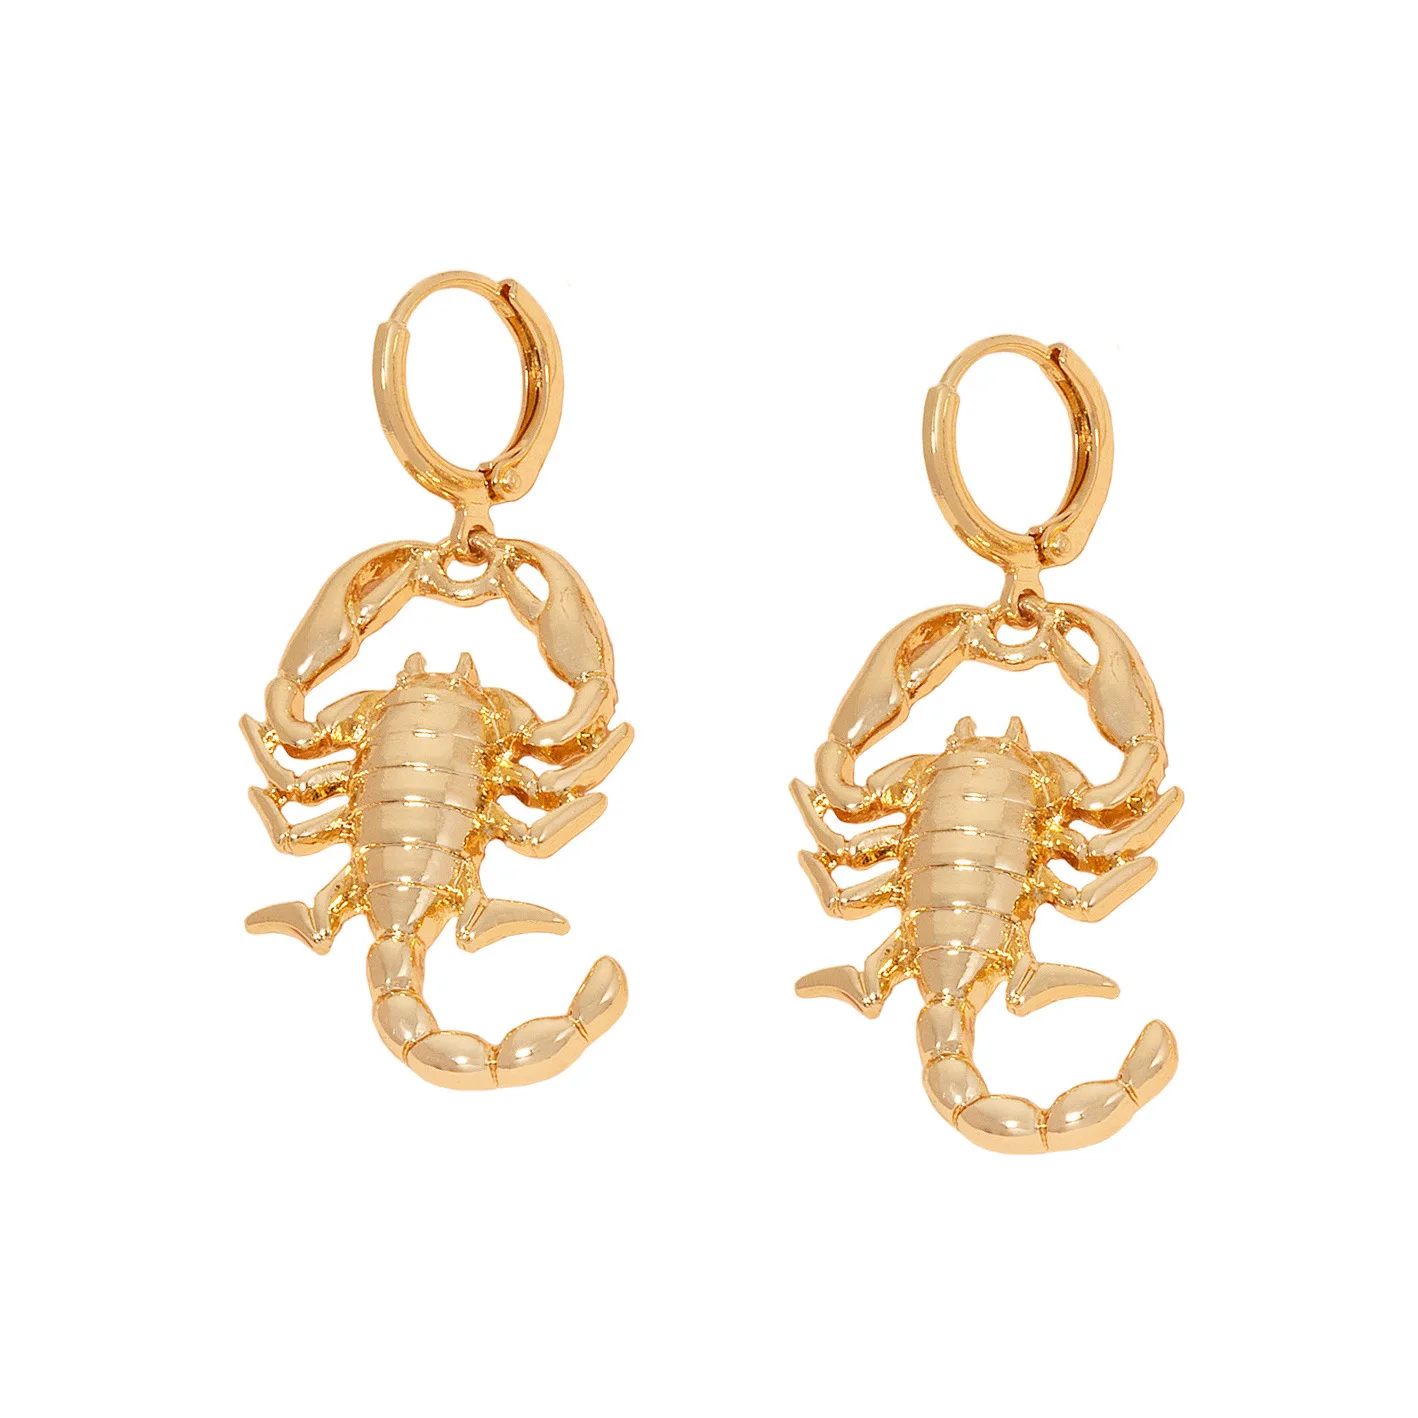 

Punk Exaggerated Retro New 2021 Animal Scorpion Dangle Earrings Fashion Gold Huggie Earring For Women, Like picture